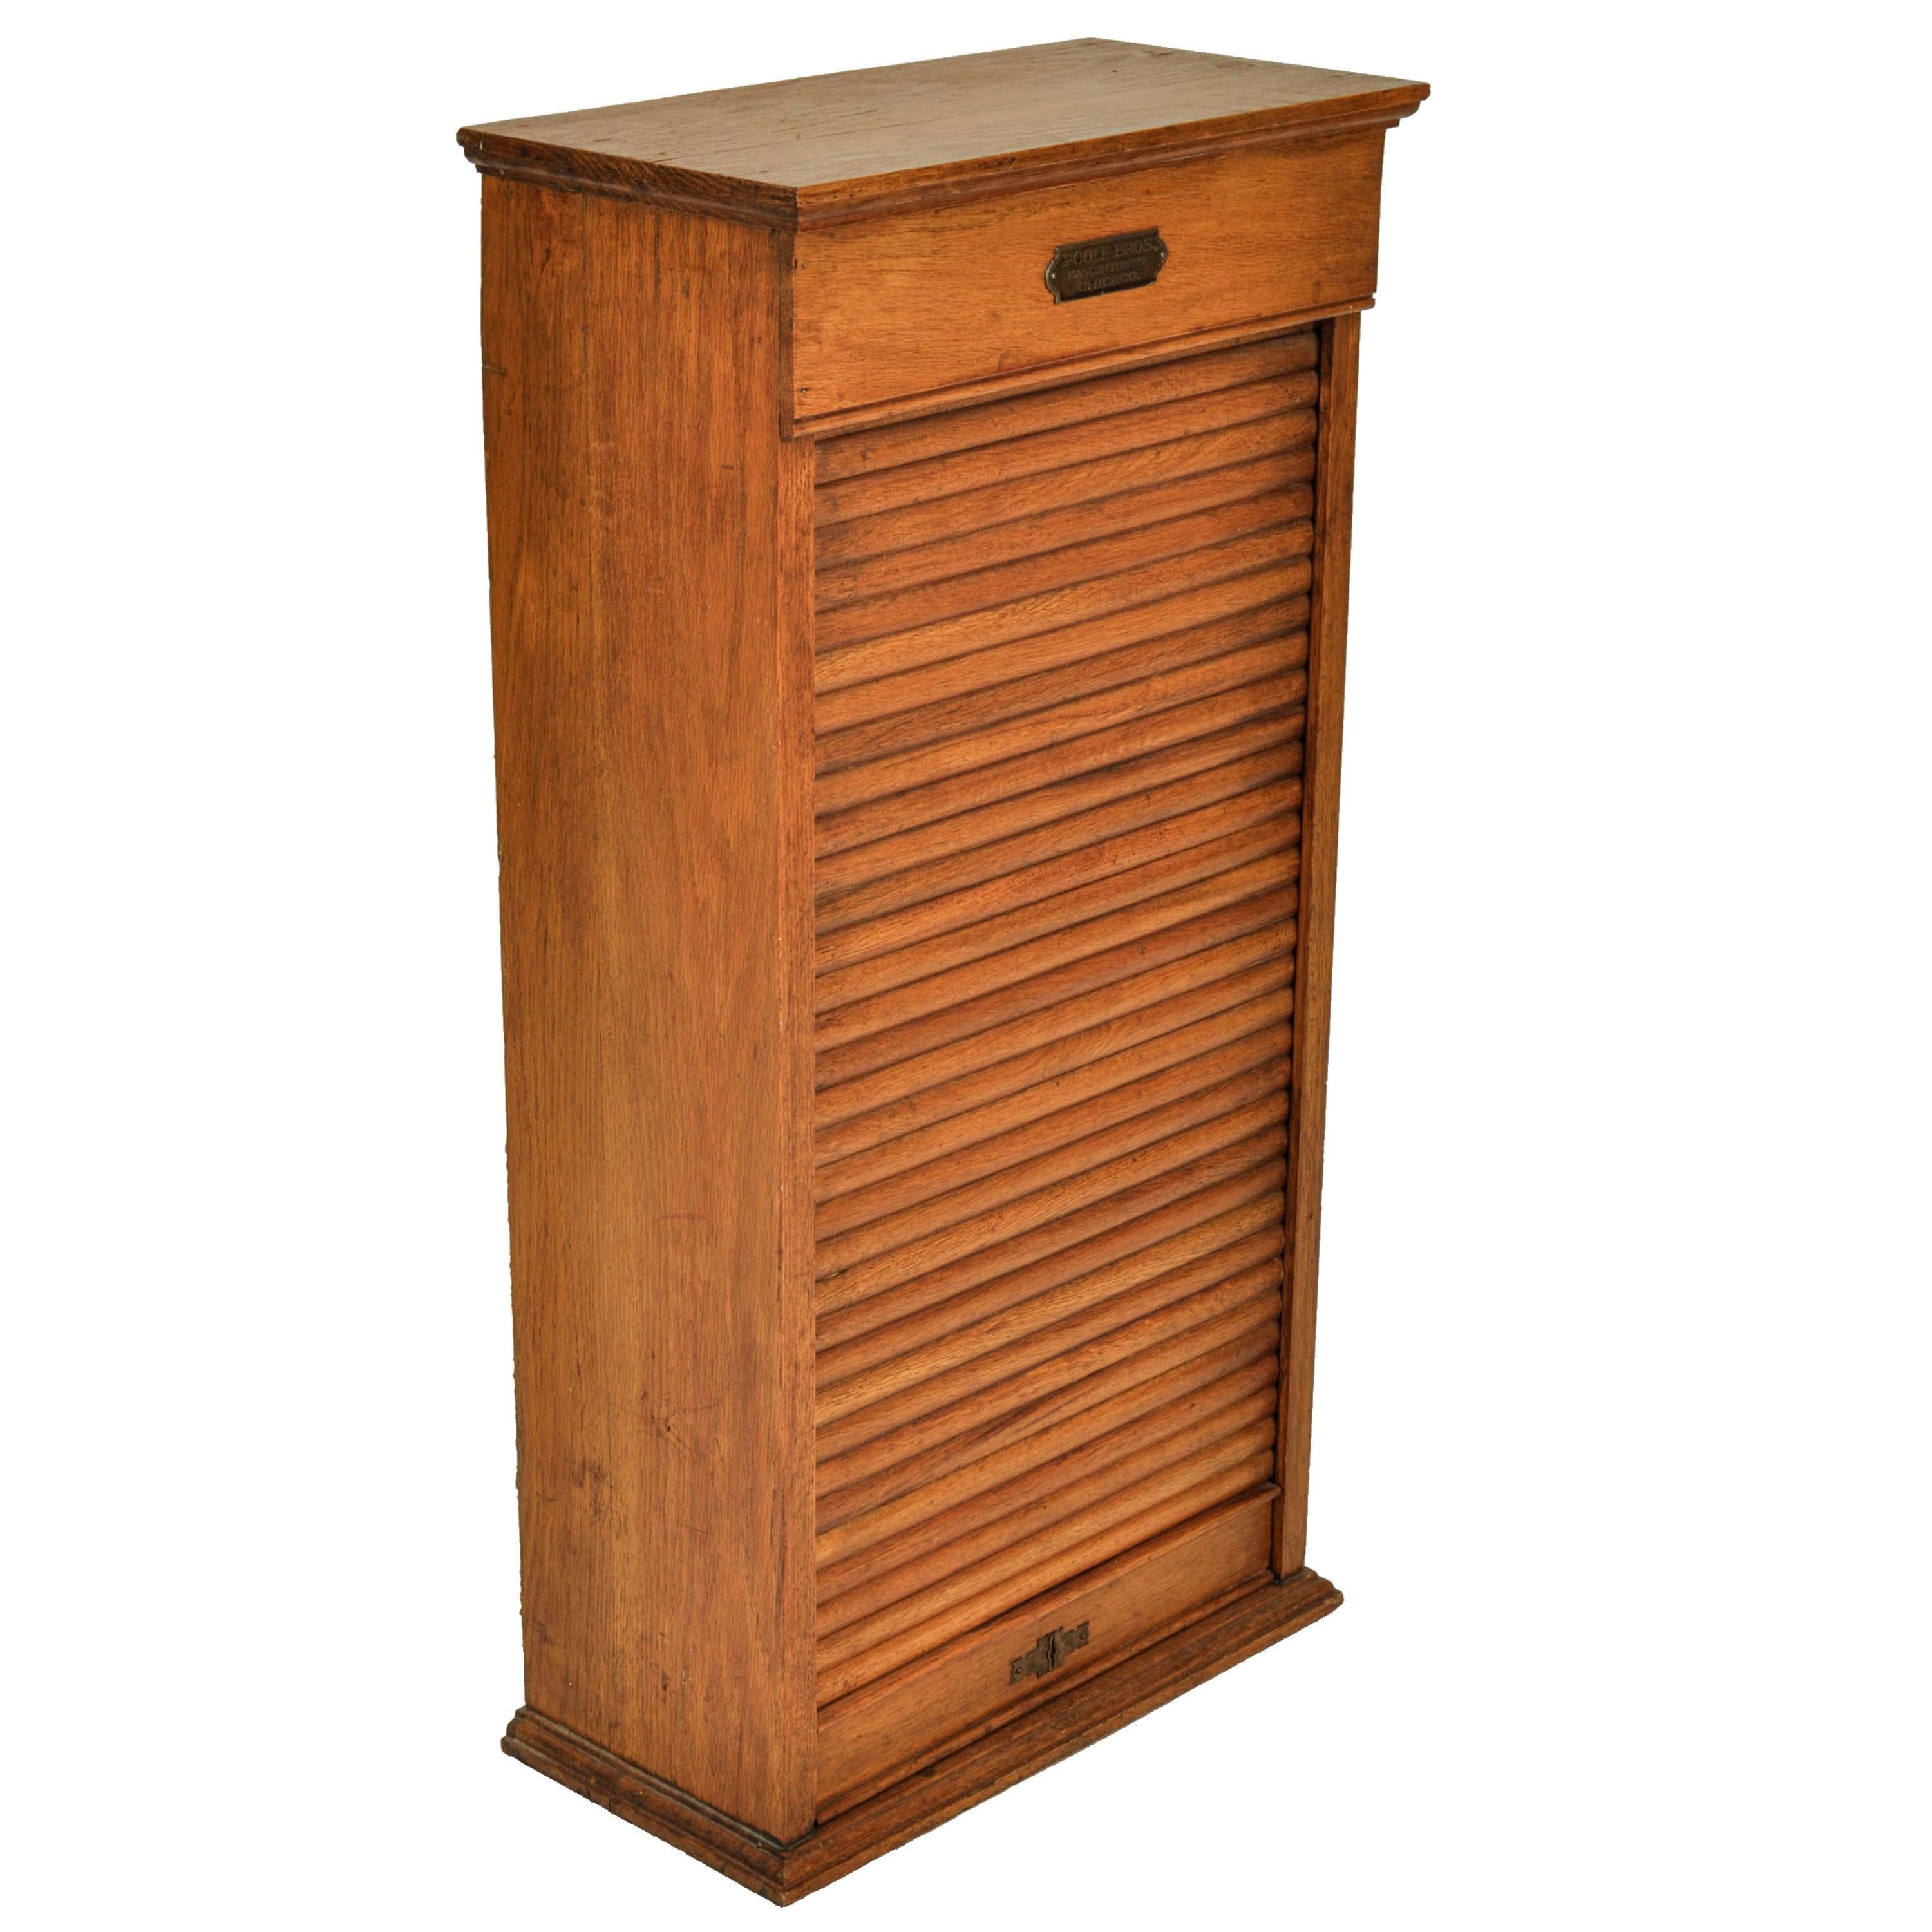 Antique American Oak Poole Bros Railway Ticket Roll Top Tambour Cabinet Chicago In Good Condition For Sale In Portland, OR